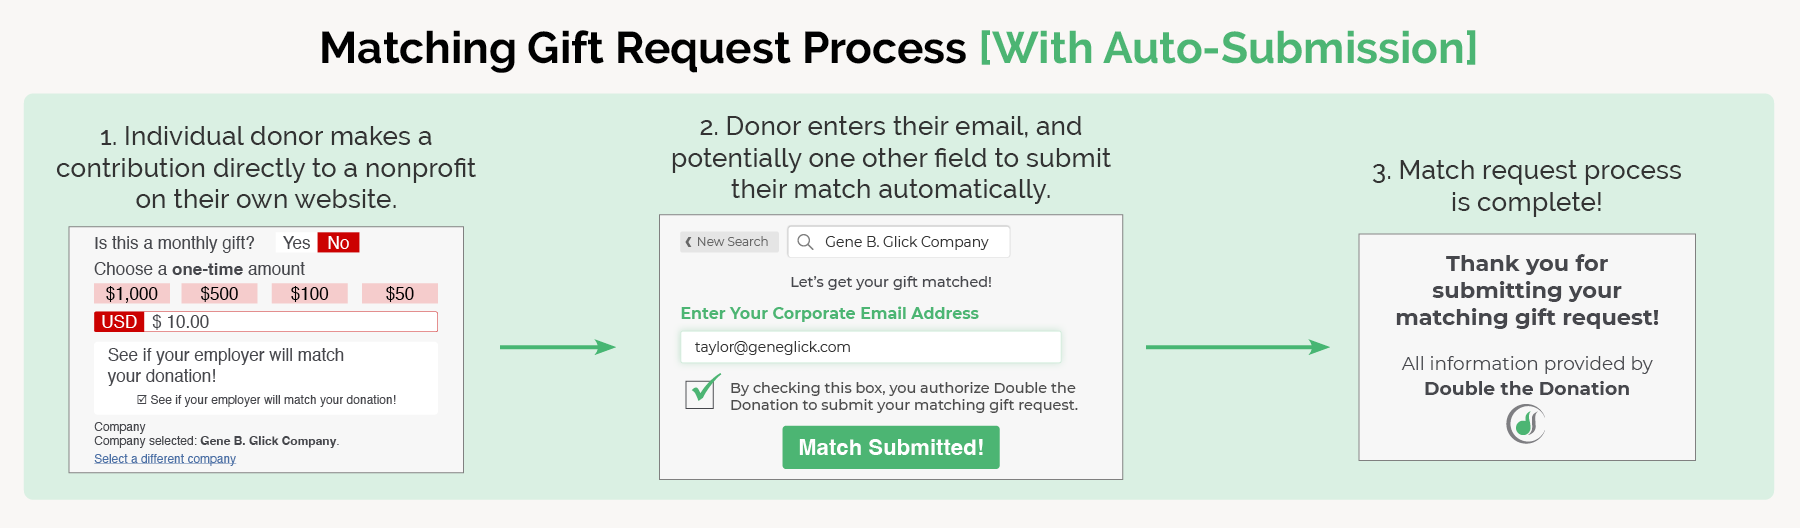 The image shows the matching gift process with auto-submission, written out below.